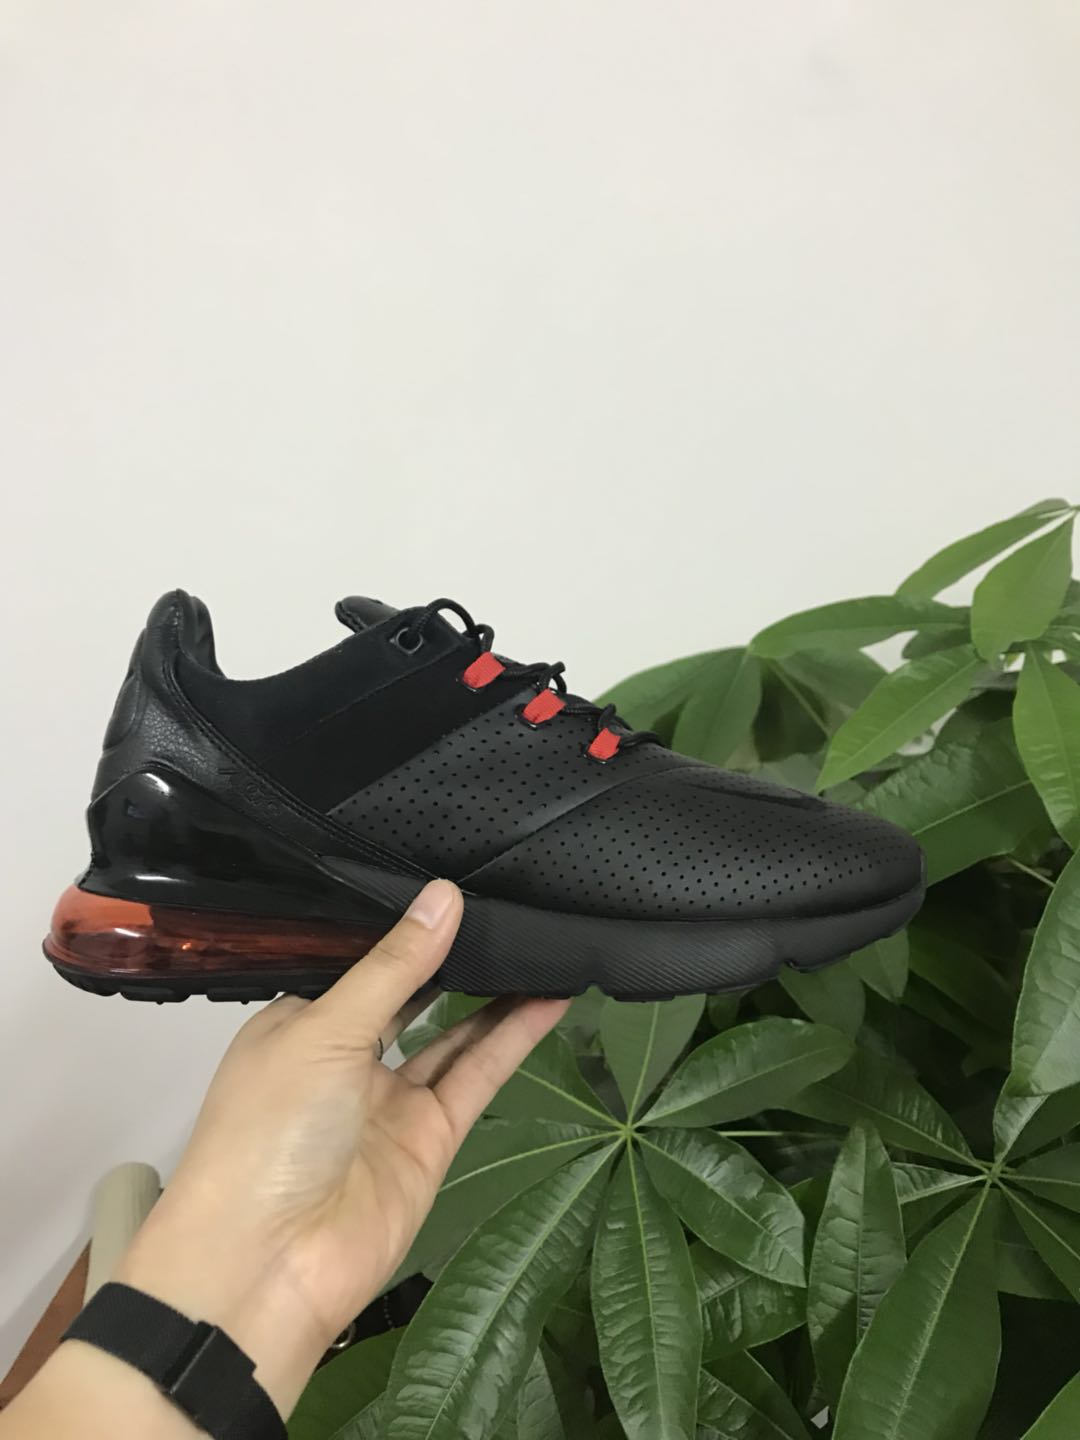 New Nike Air Max 270 Black Red - Click Image to Close